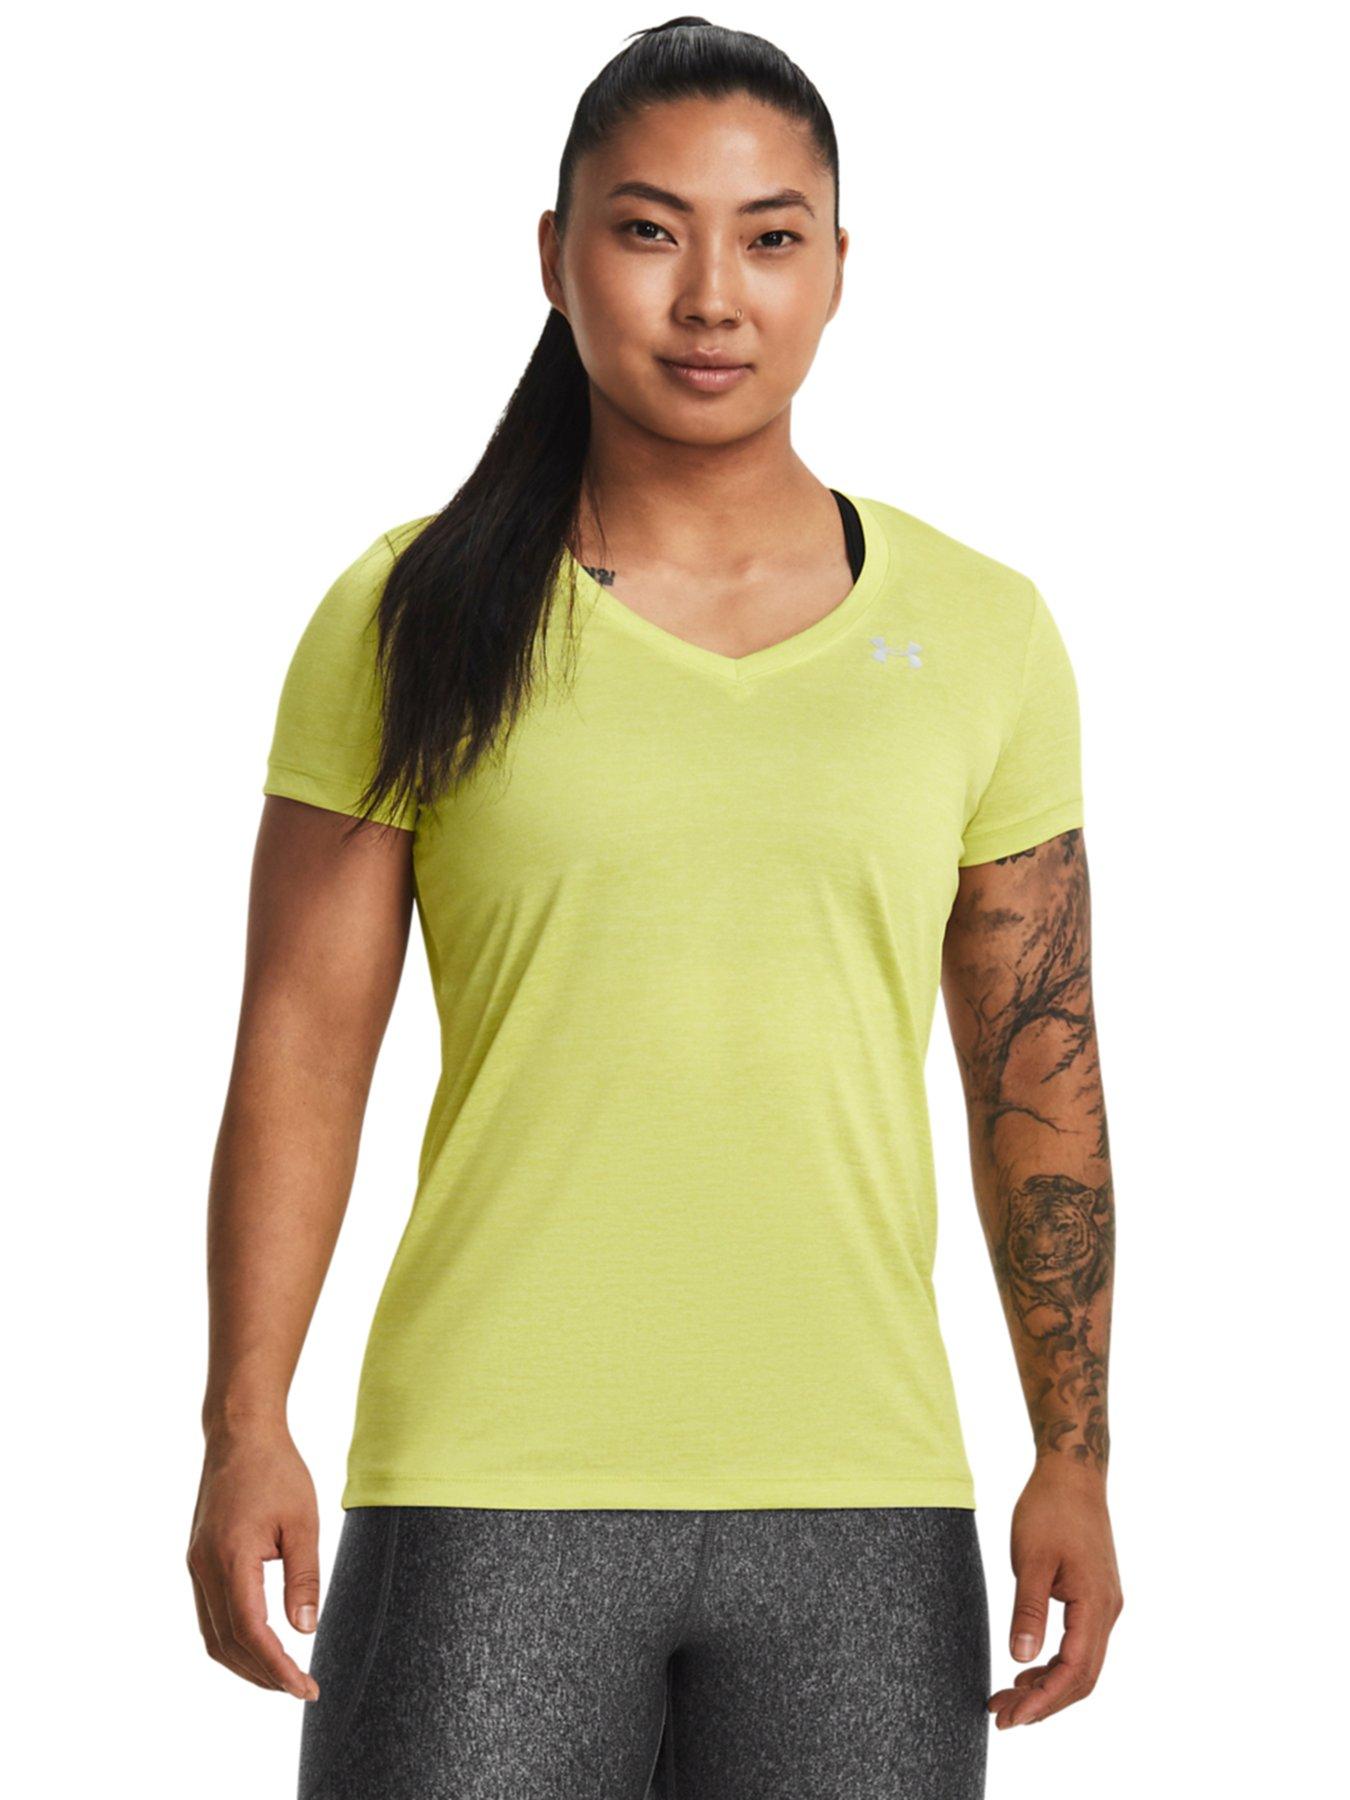 UNDER ARMOUR Womens Training Seamless Long Sleeve Top - Grey/White